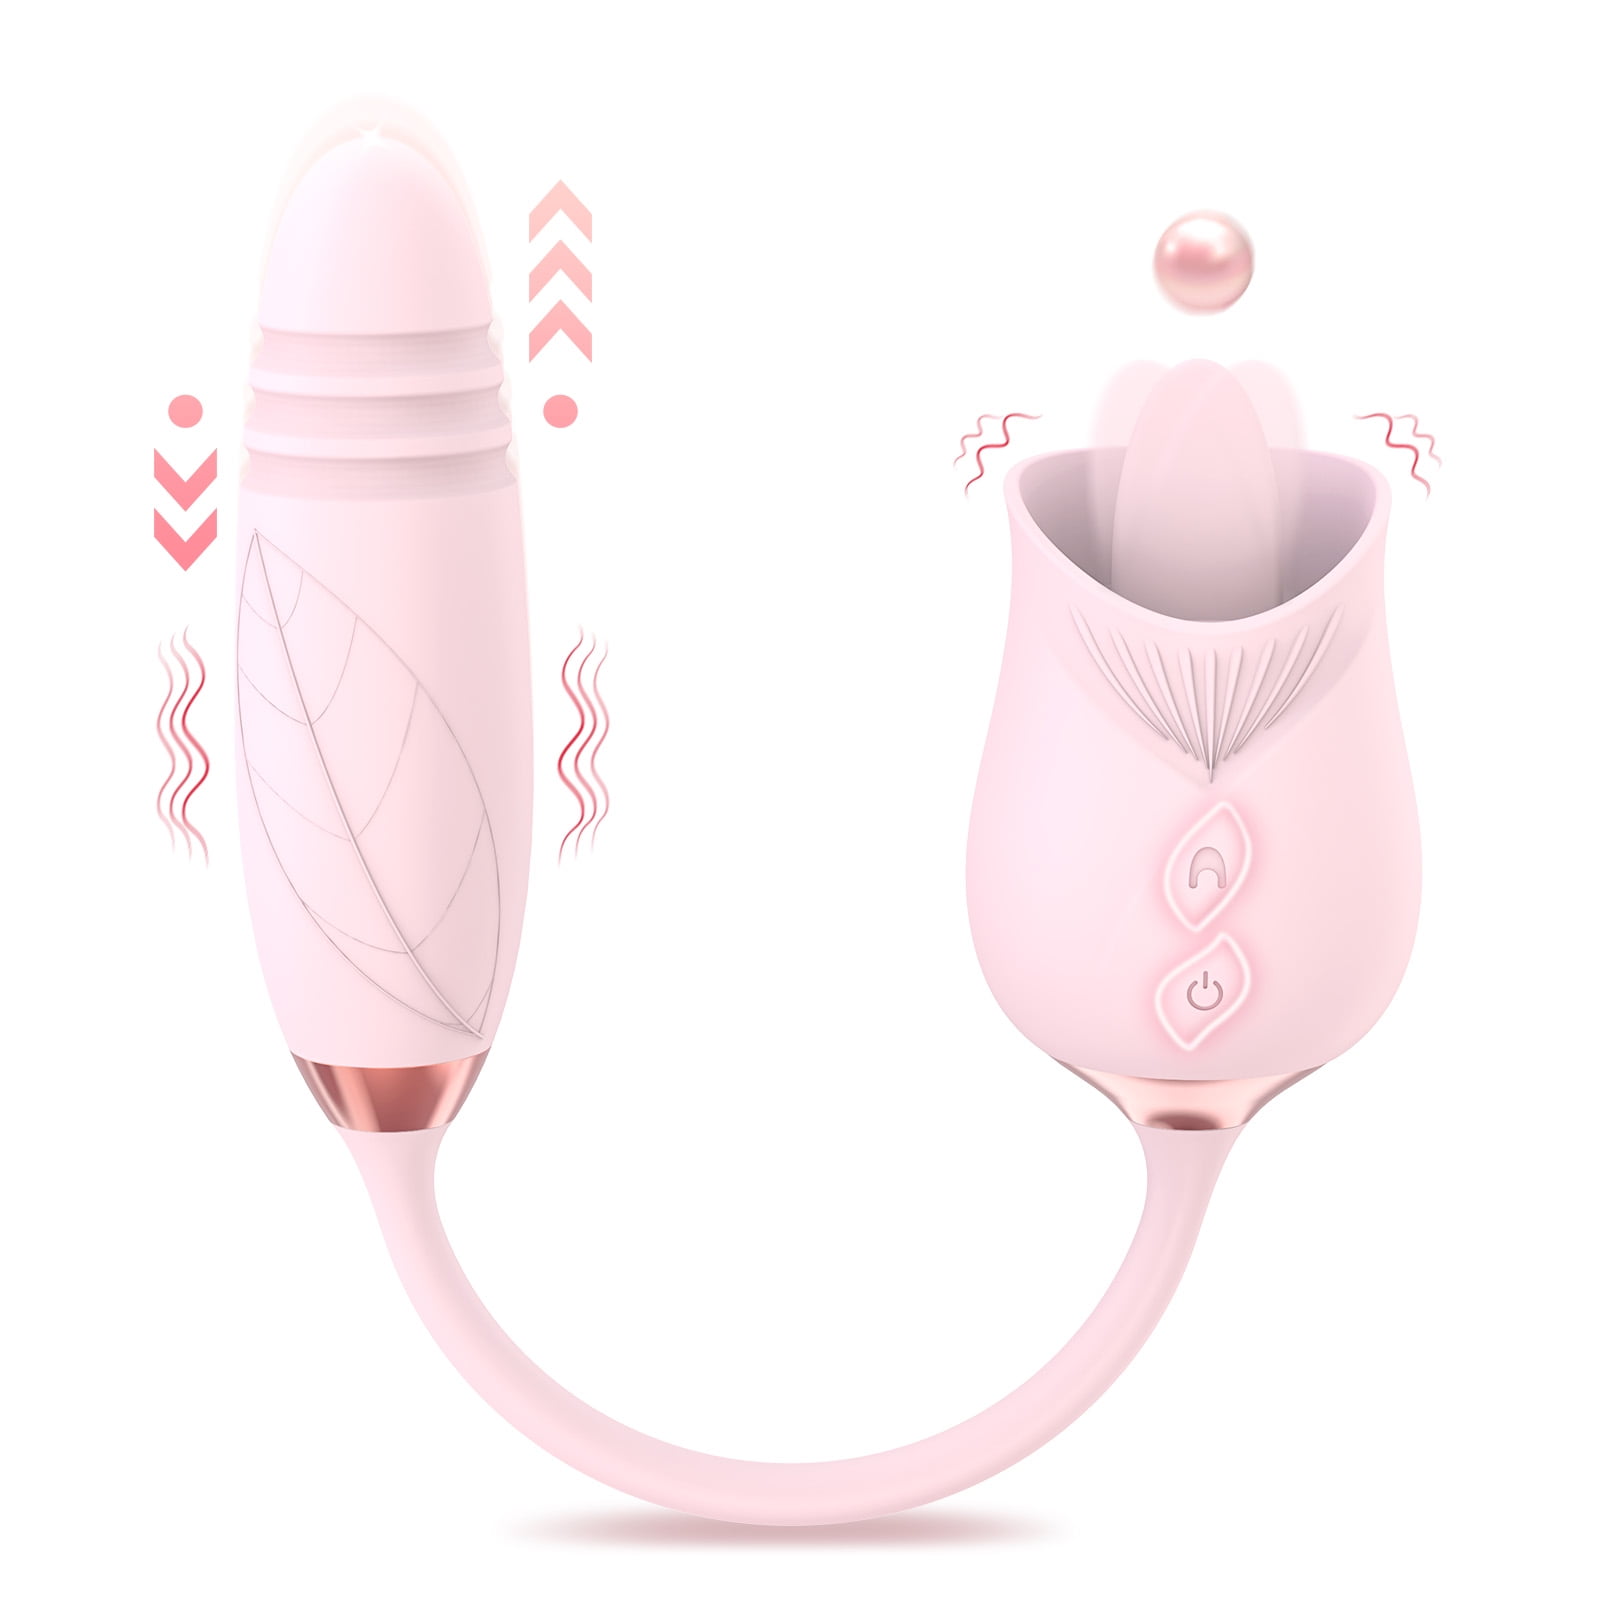 Rose Sex Toy Vibrator for Woman DARZU Adult Toys with 10 Modes, G-spot Dildo Nipple Massager Stimulator for Women - Pink image